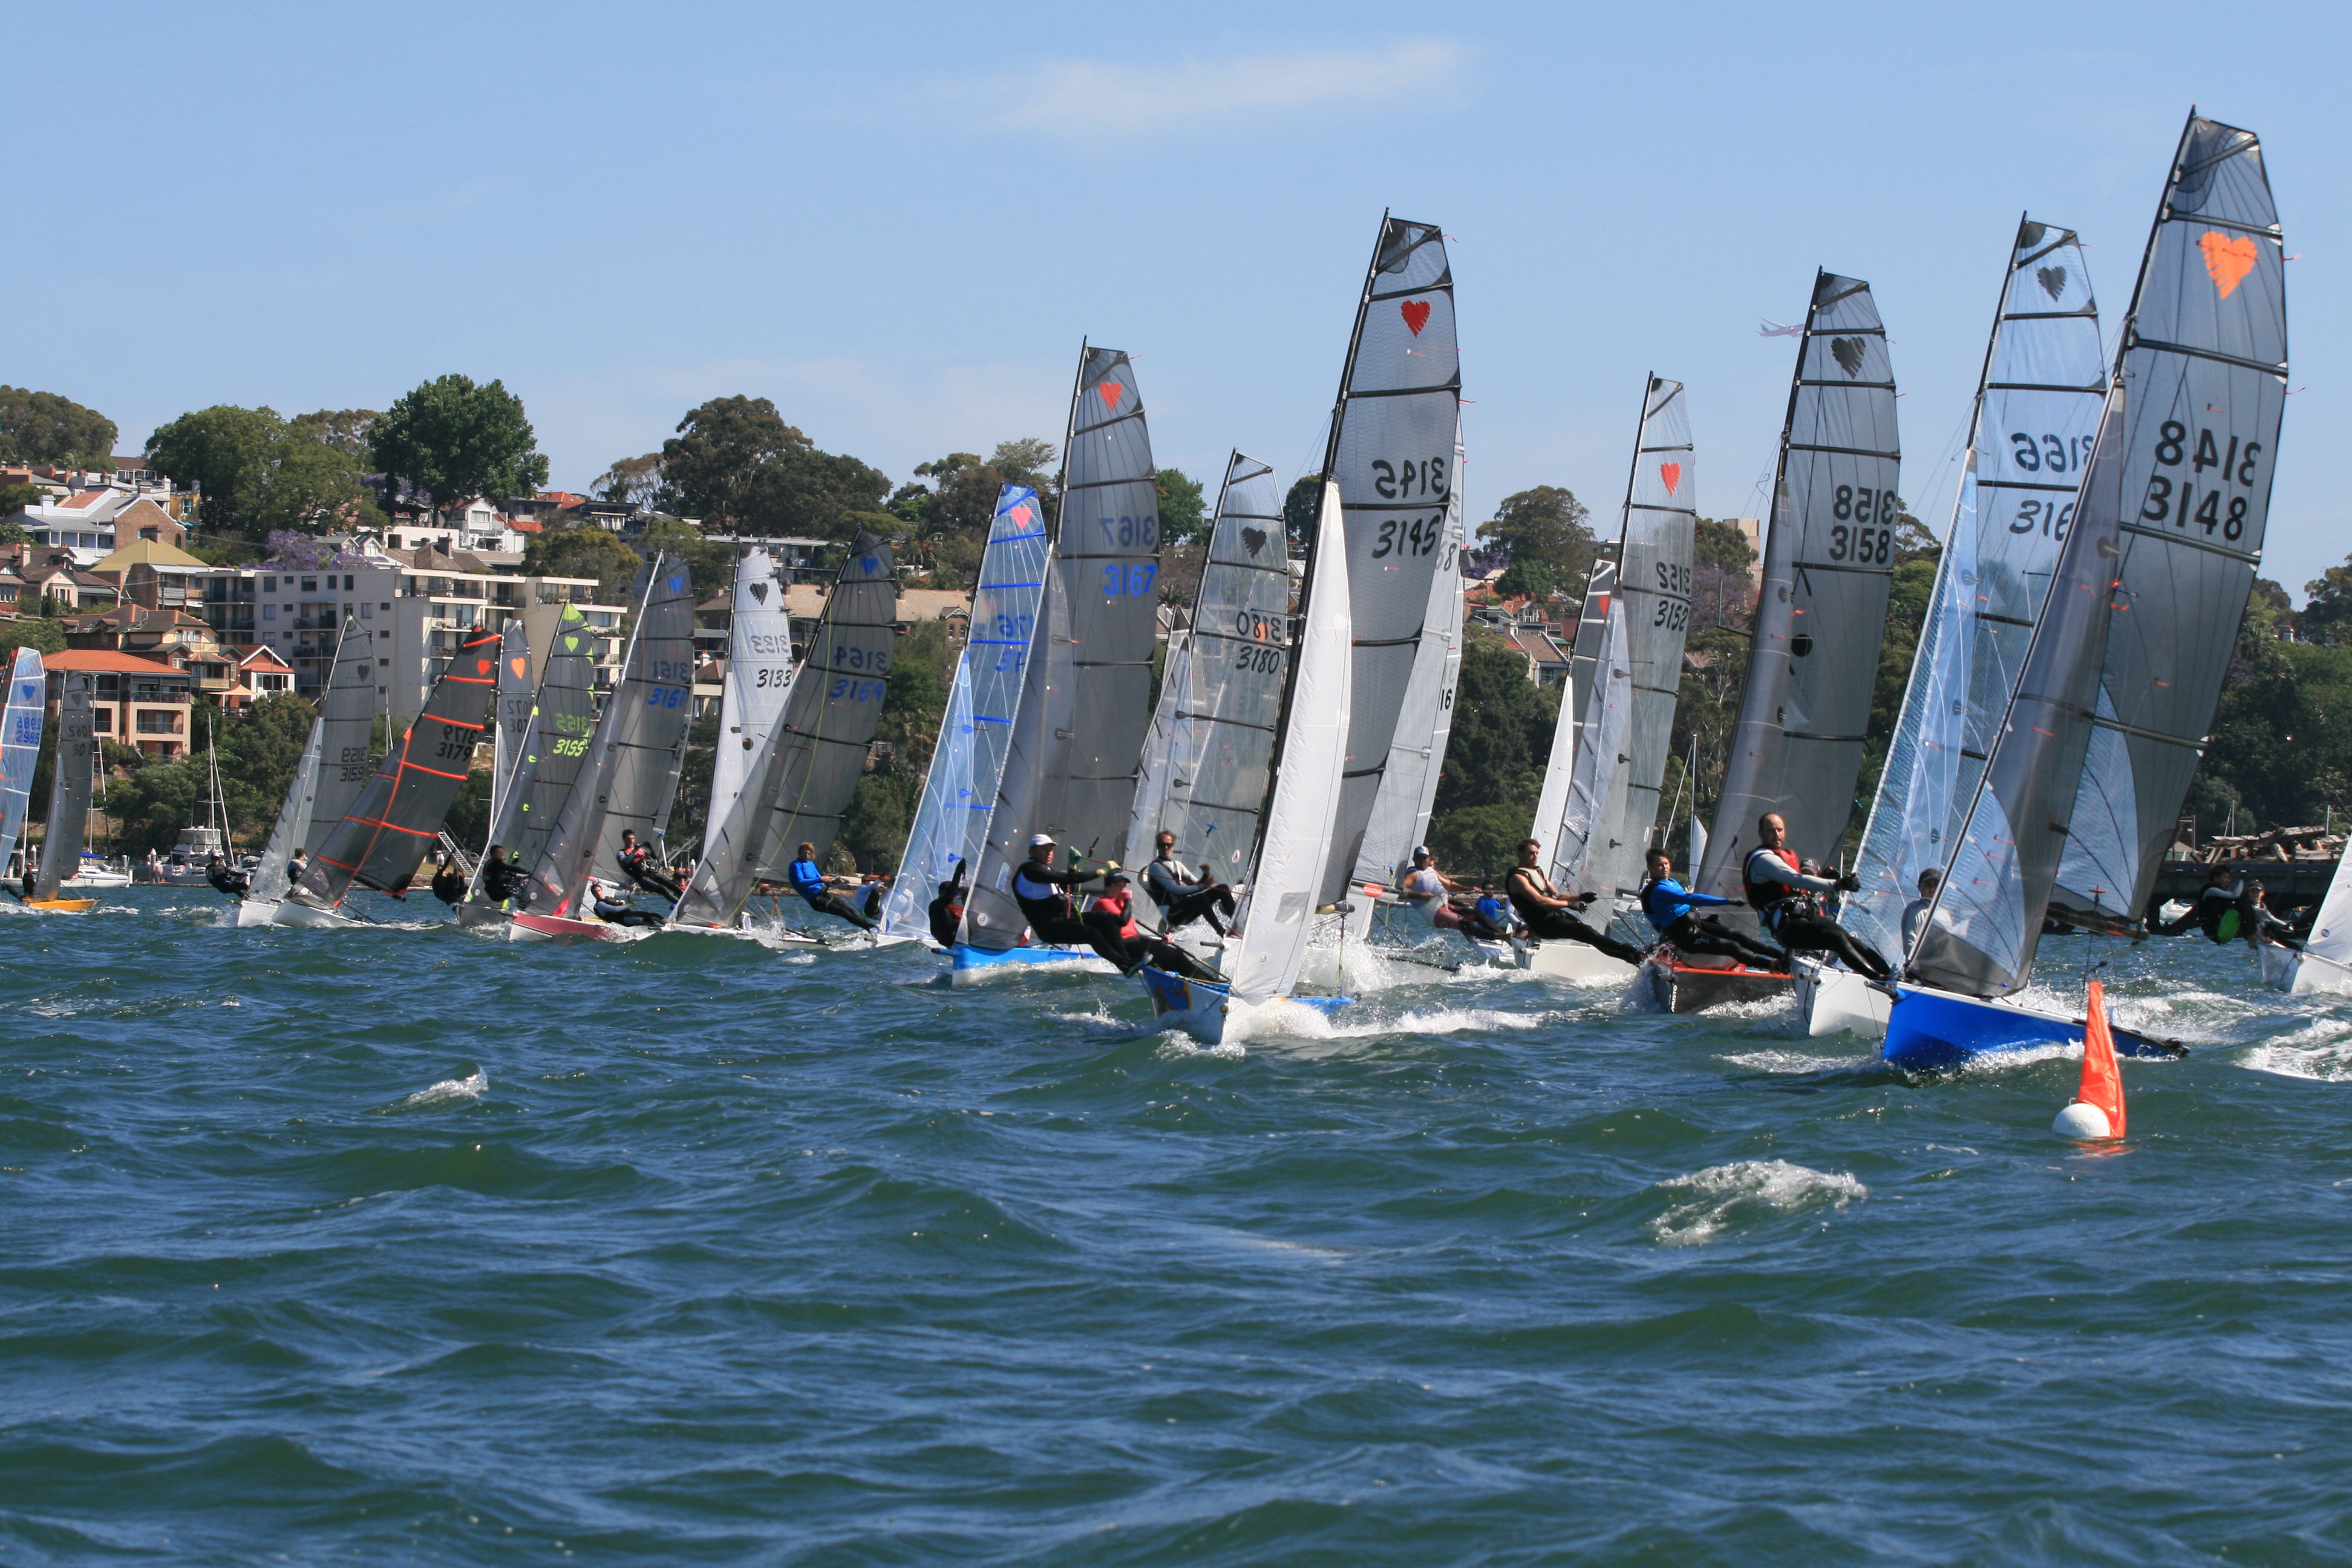 A total of 33 Cherubs on the start line meant close racing throughout the fleet.